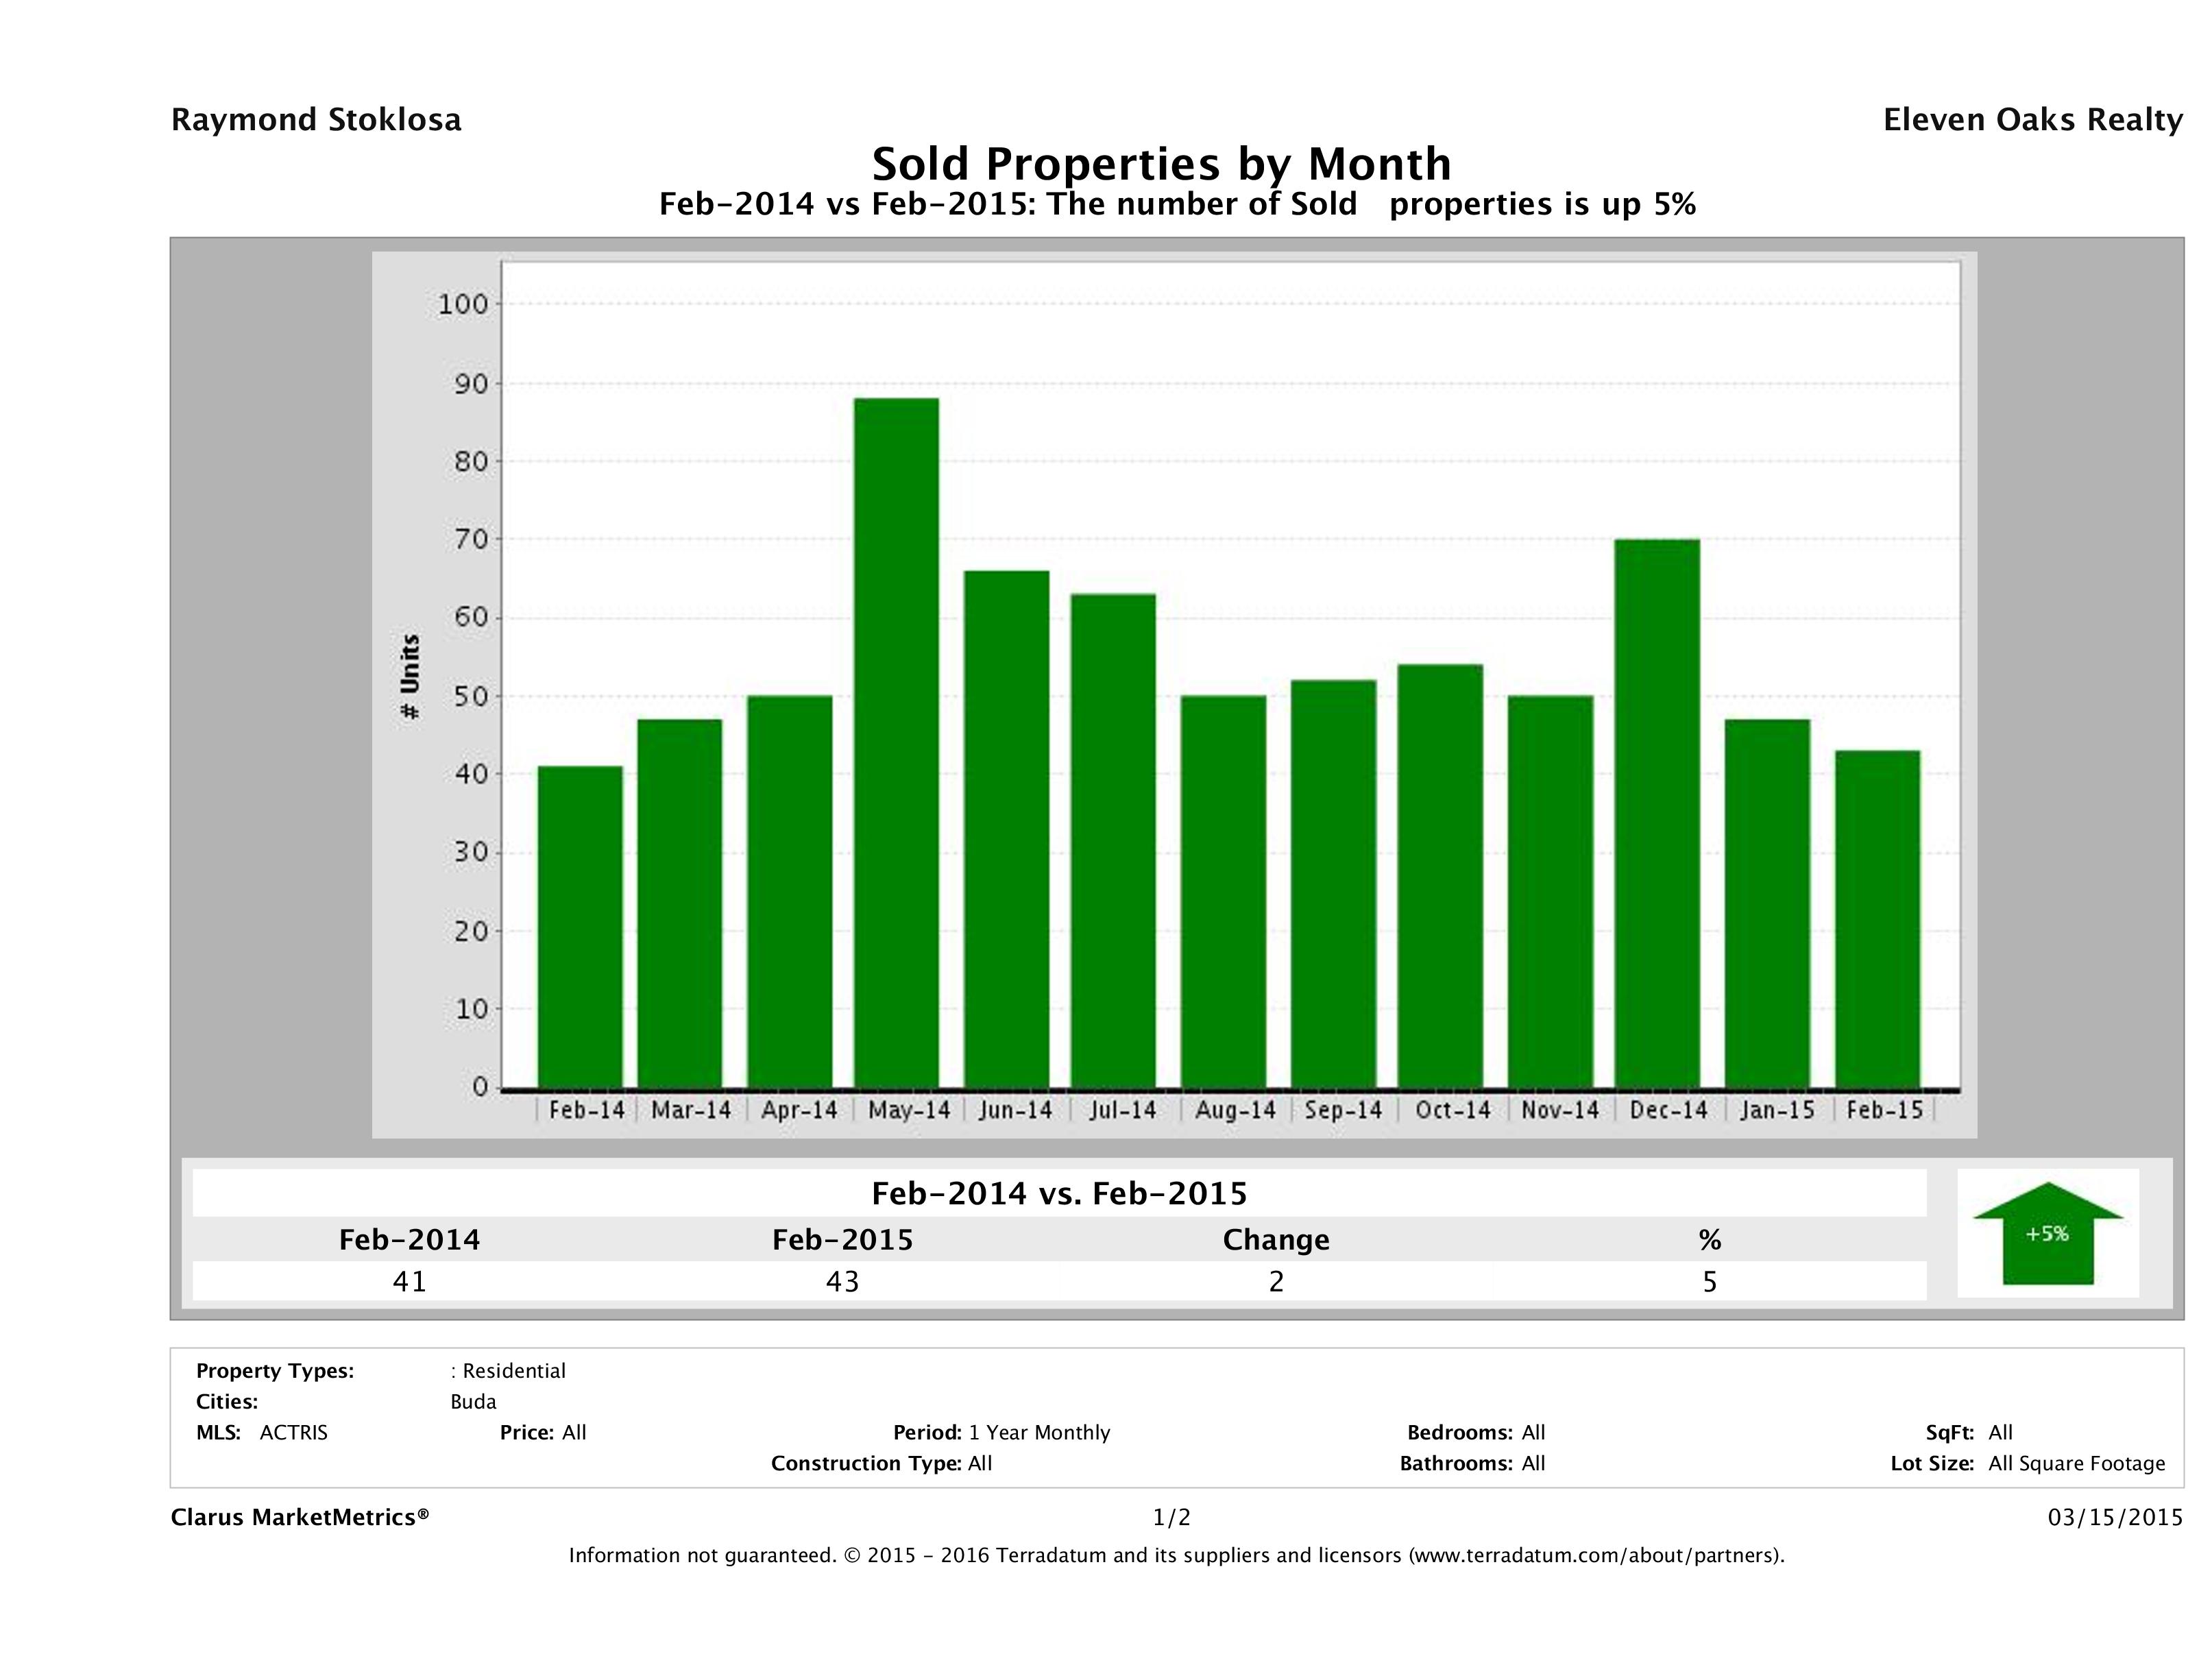 Buda number of homes sold February 2015